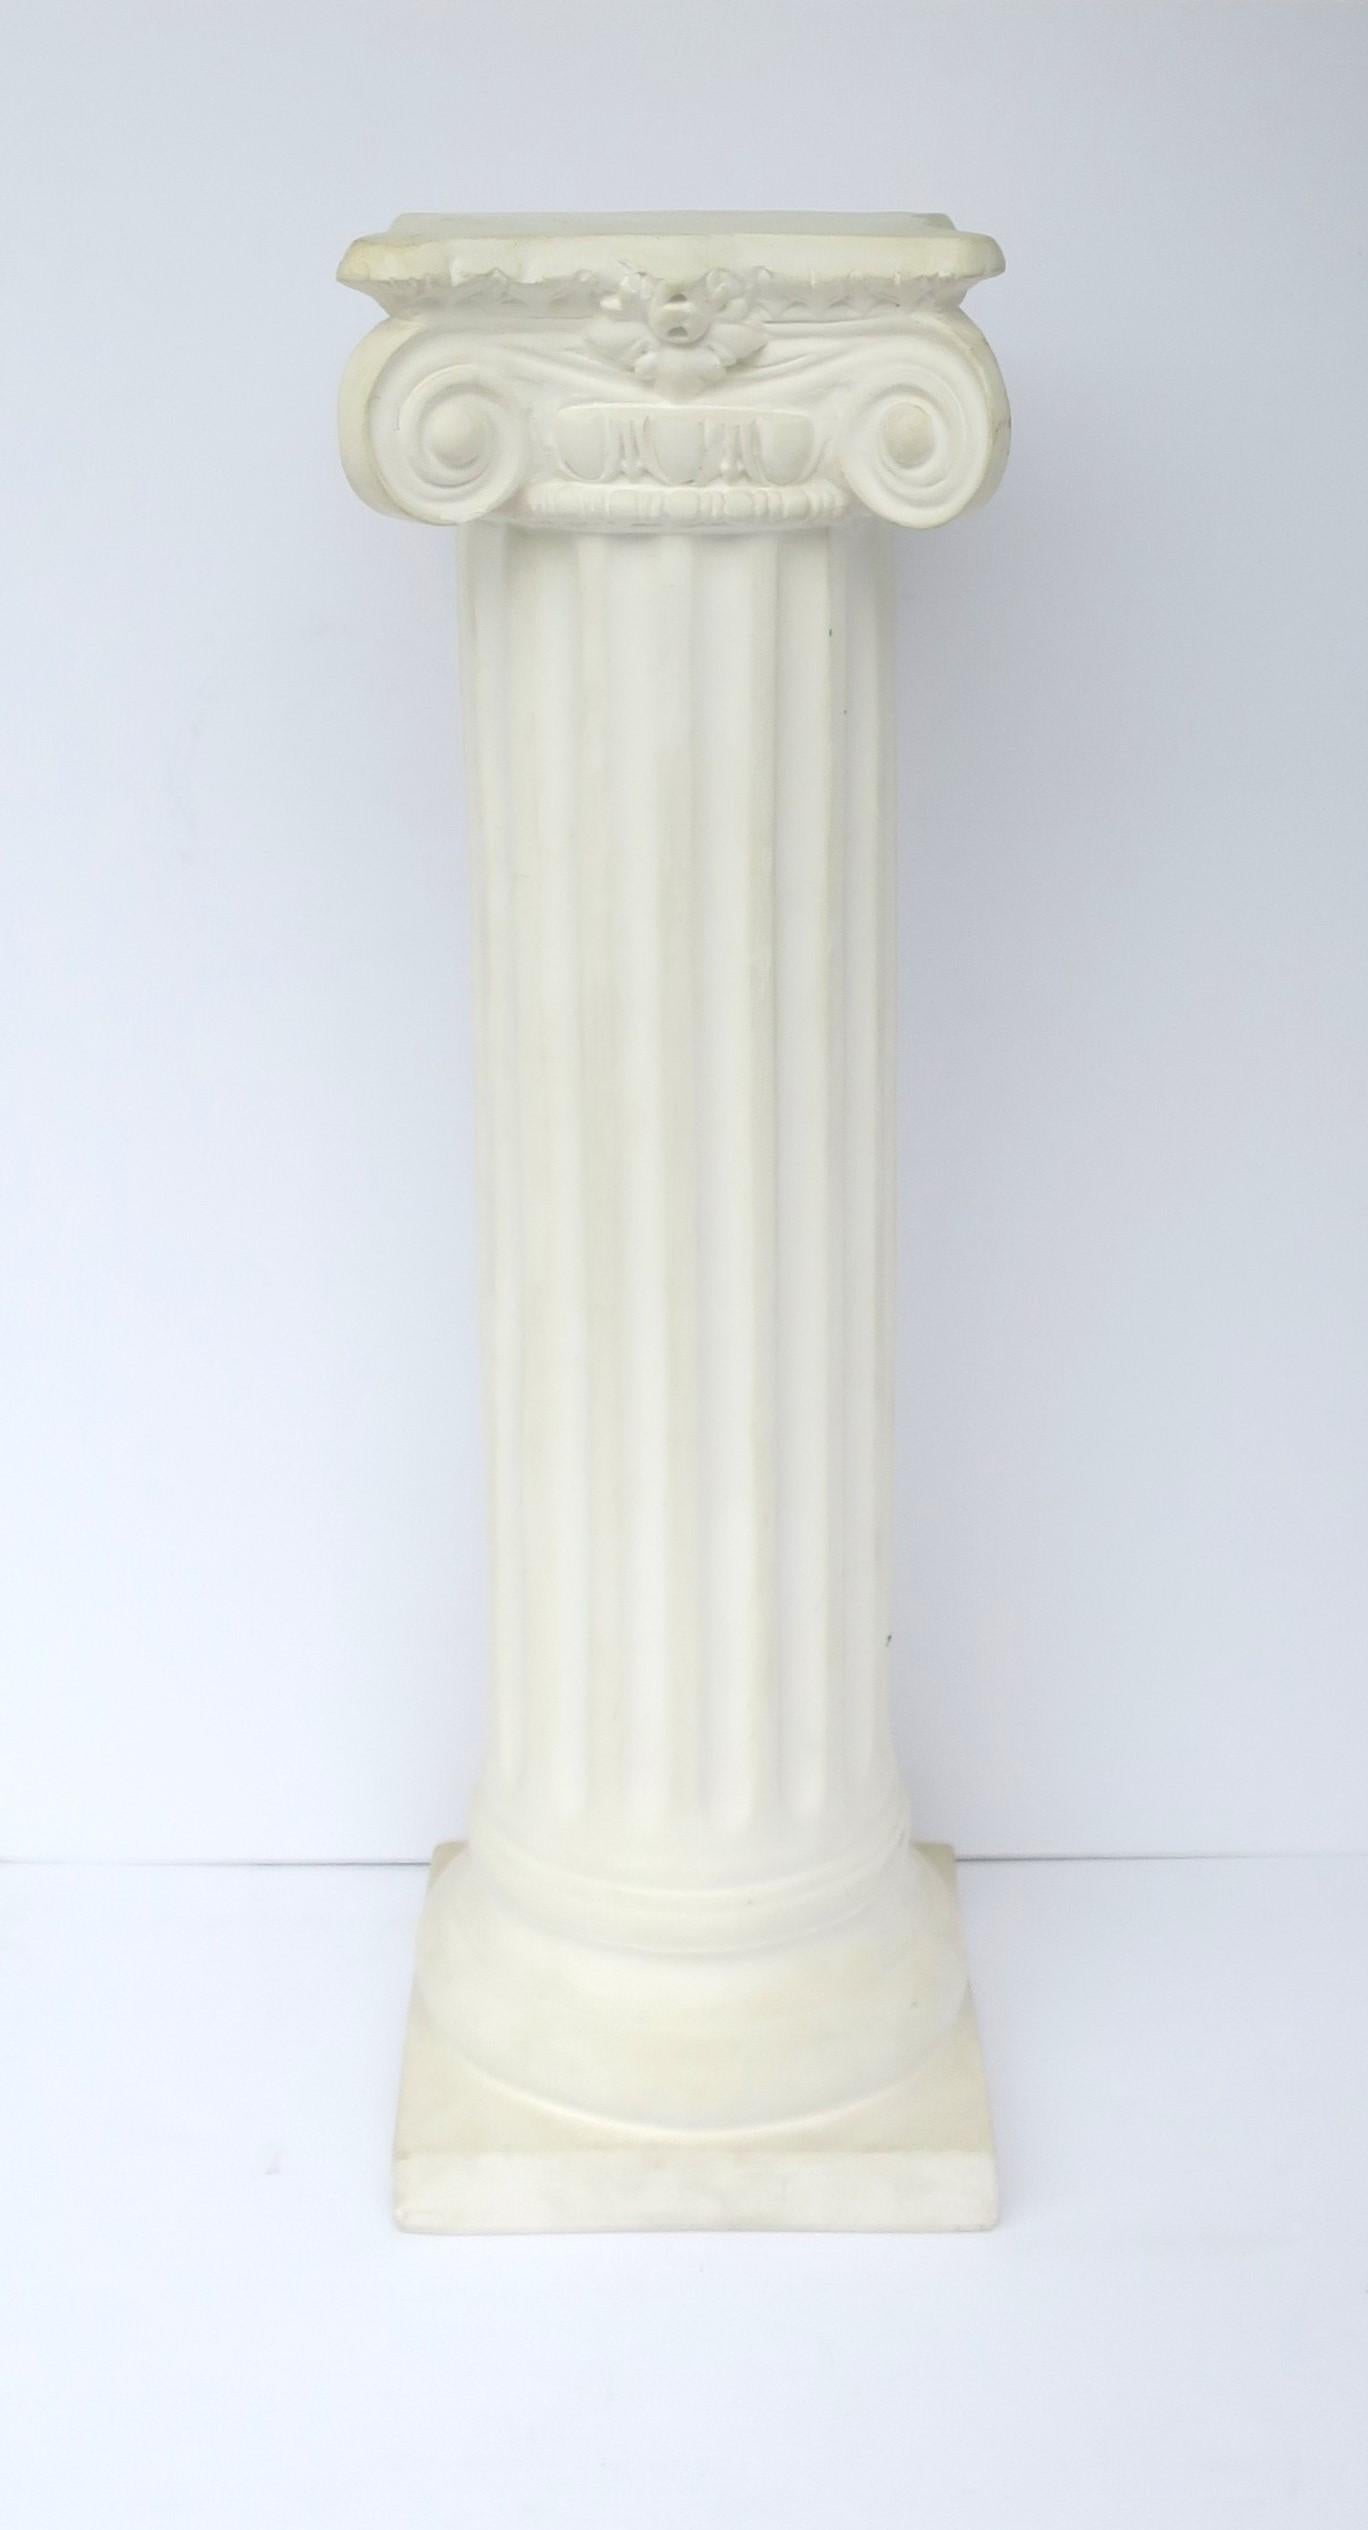 A white plaster fluted Grecian Ionic order column pillar pedestal stand in the neoclassical style, circa 20th century. Column has a matte unglazed surface. A great piece for a sculpture, plant, art, display, etc. 

Dimensions: 36.5